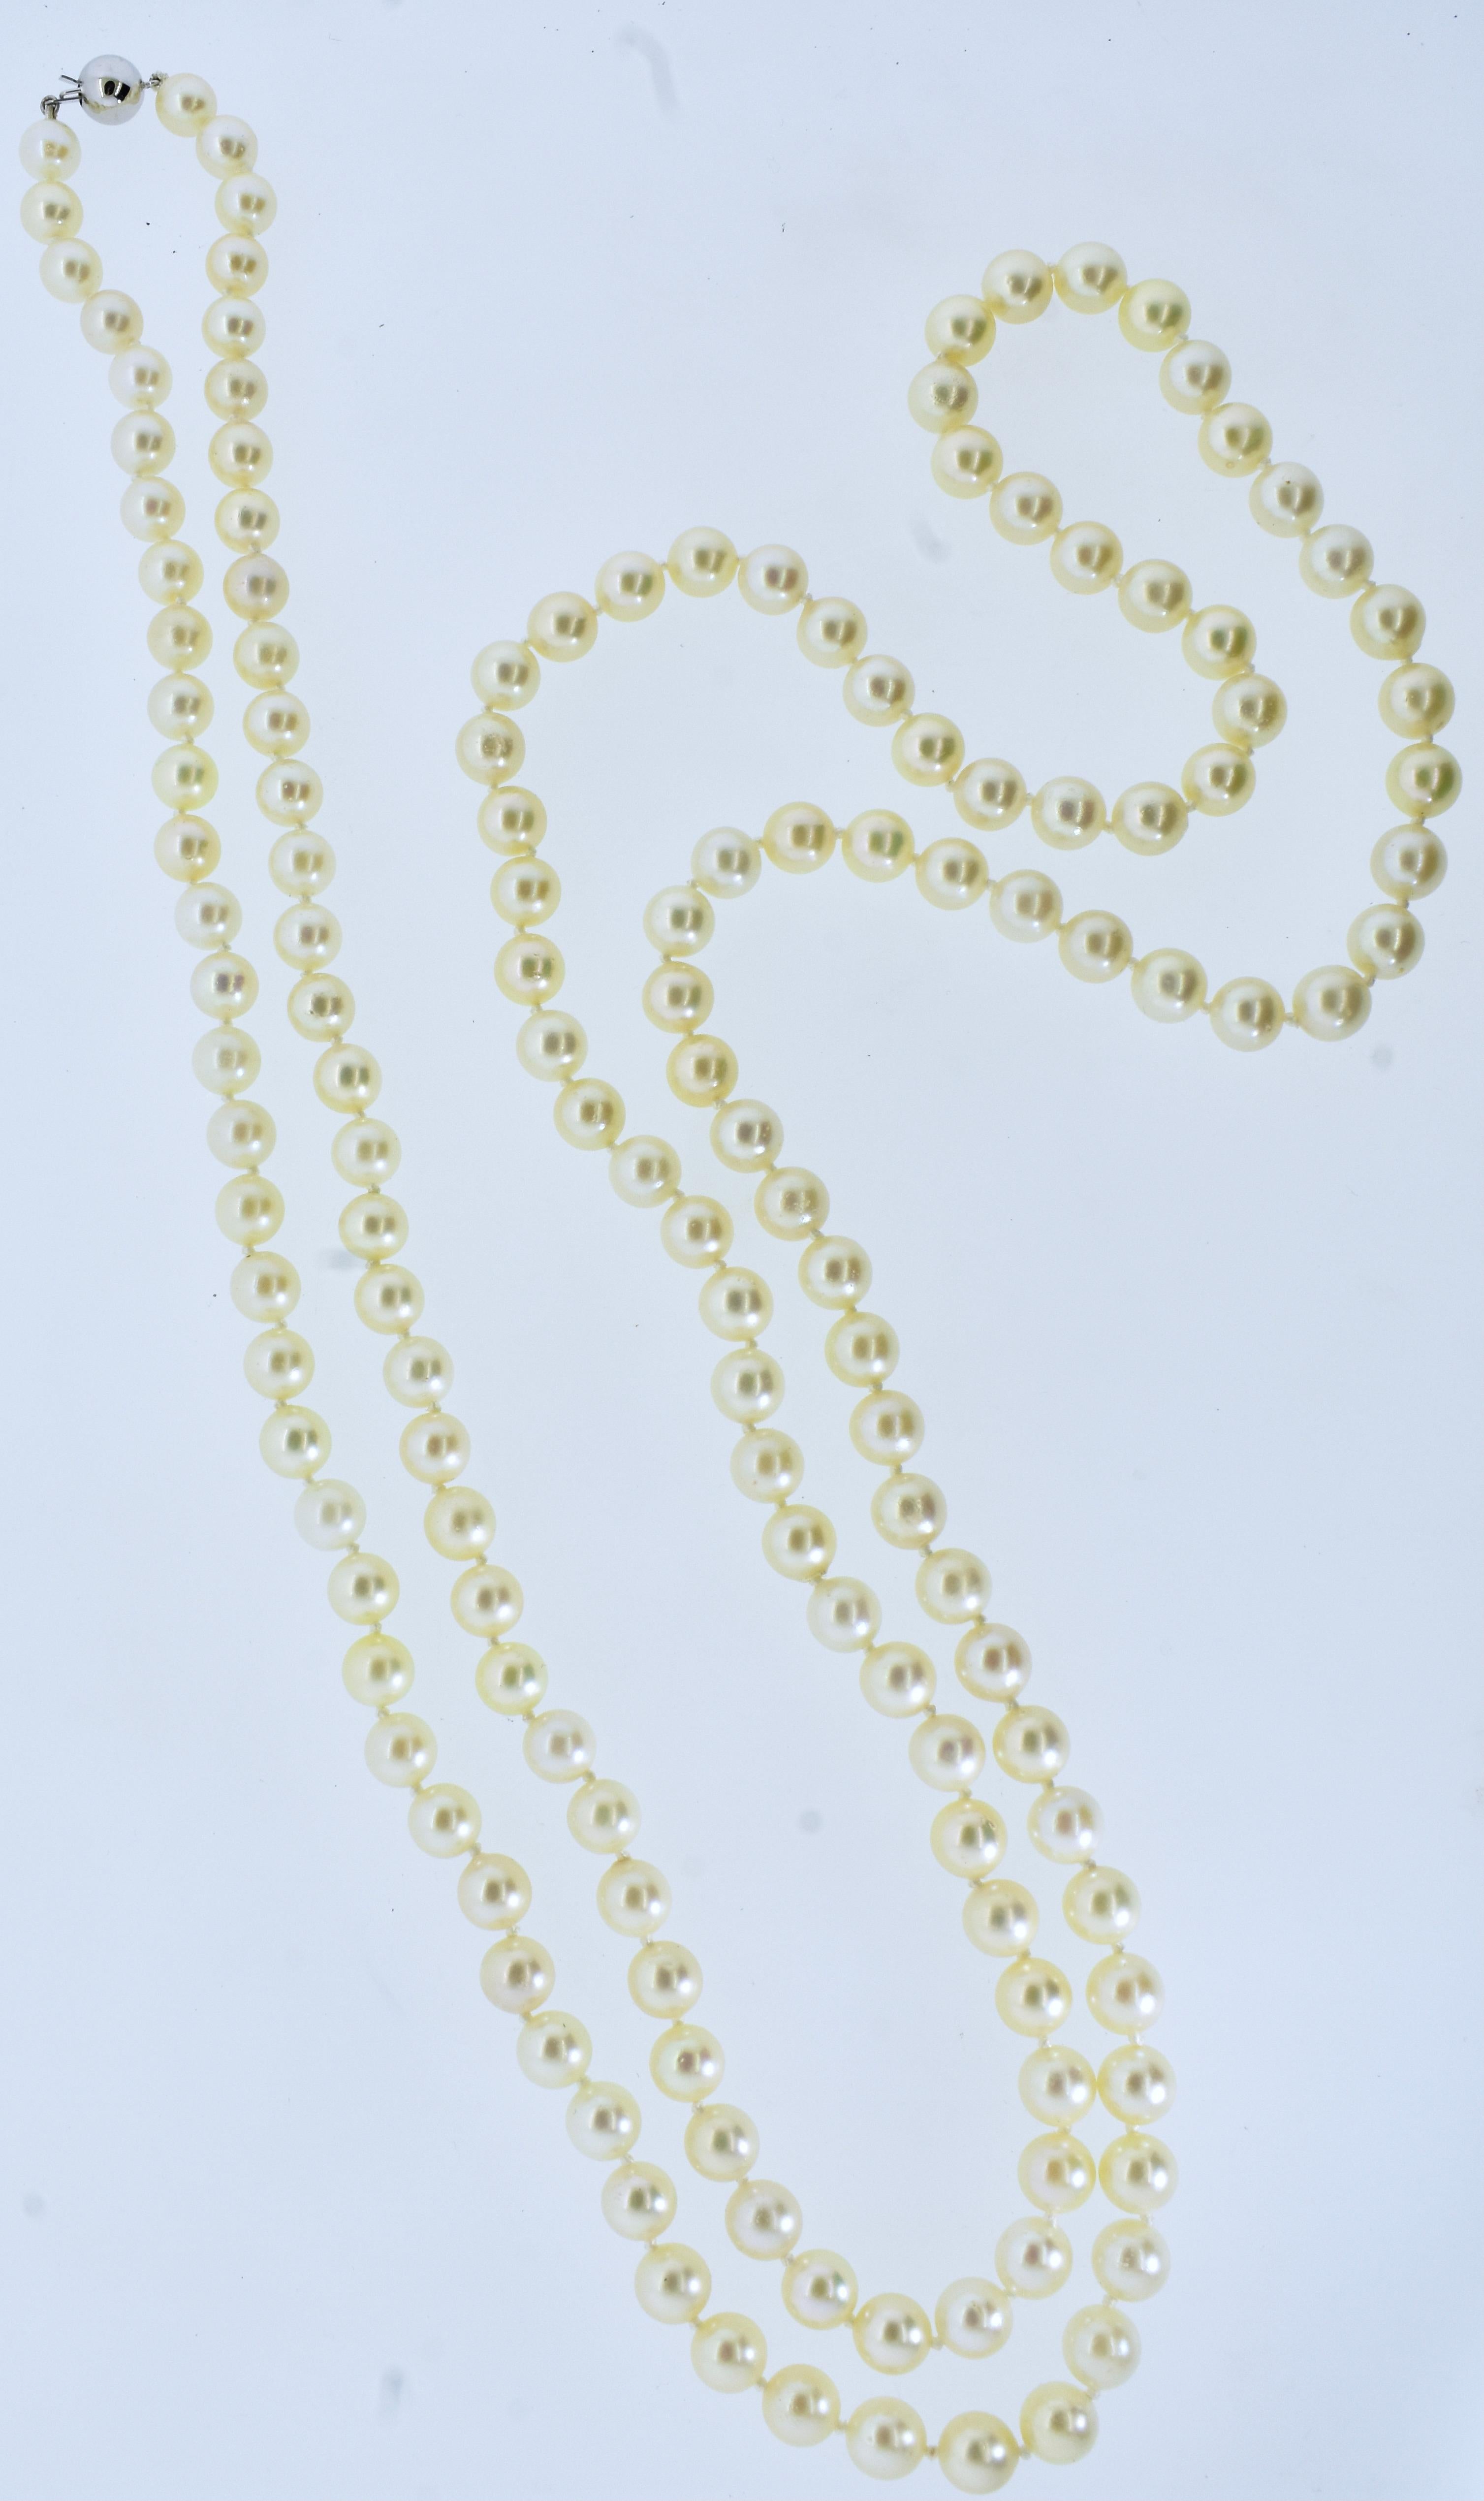 Cultured pearl double strand with a very long length of 52.5 inches.  There are 152 well matched round akoya (Japanese) pearls with a fine luster.  The pearl range in size from 7.5 to 8.0 mm.
All items sold are accompanied by a detailed appraisal by